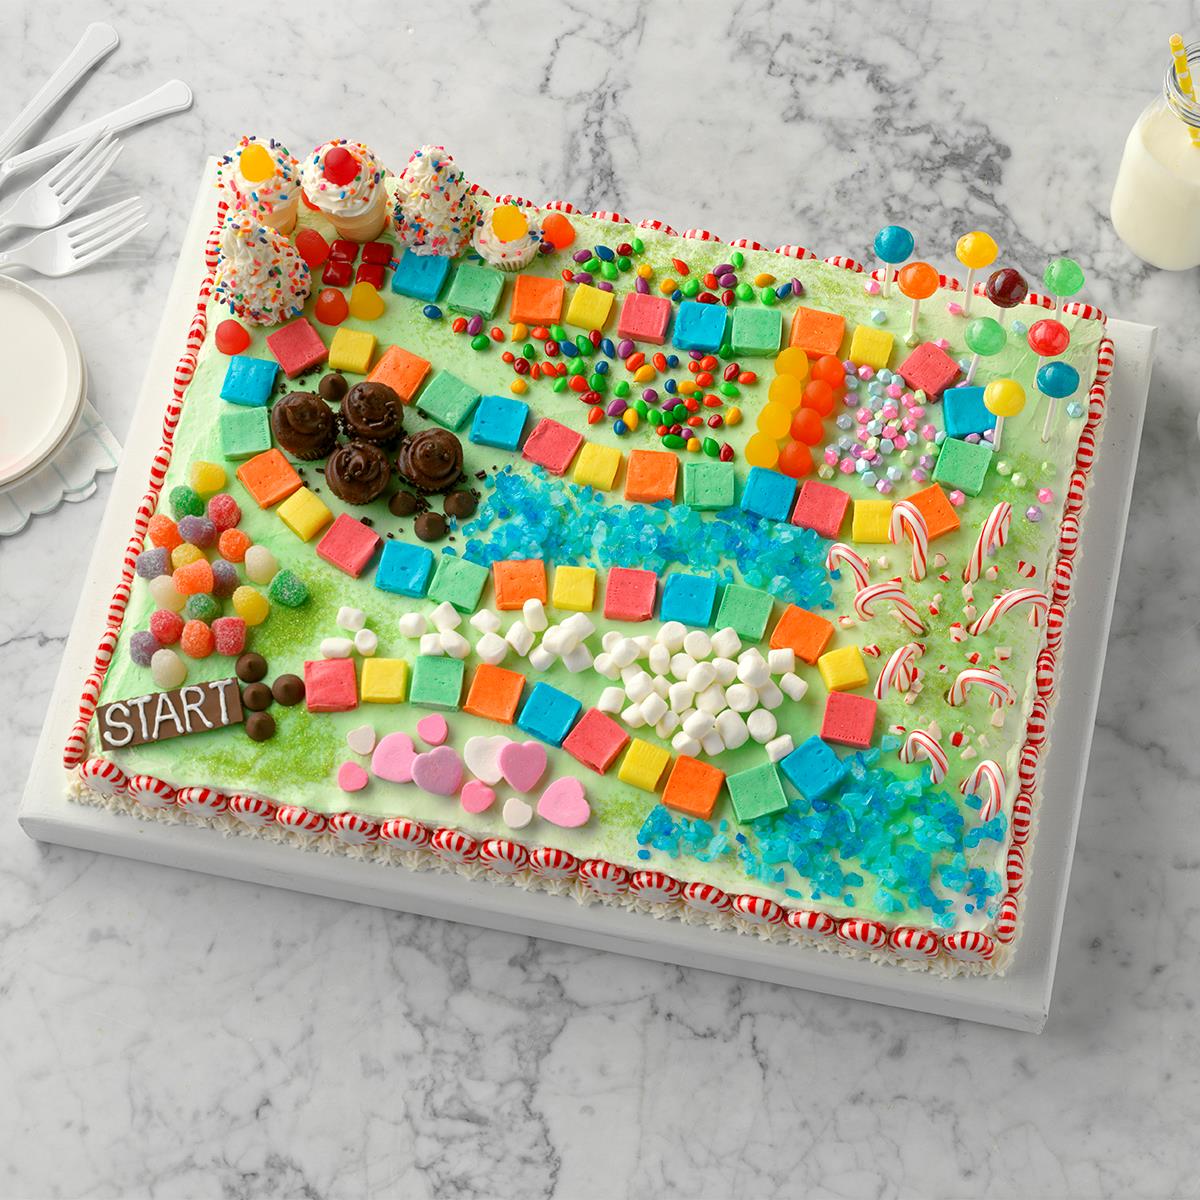 Candy Land Cake Recipe How To Make It Taste Of Home